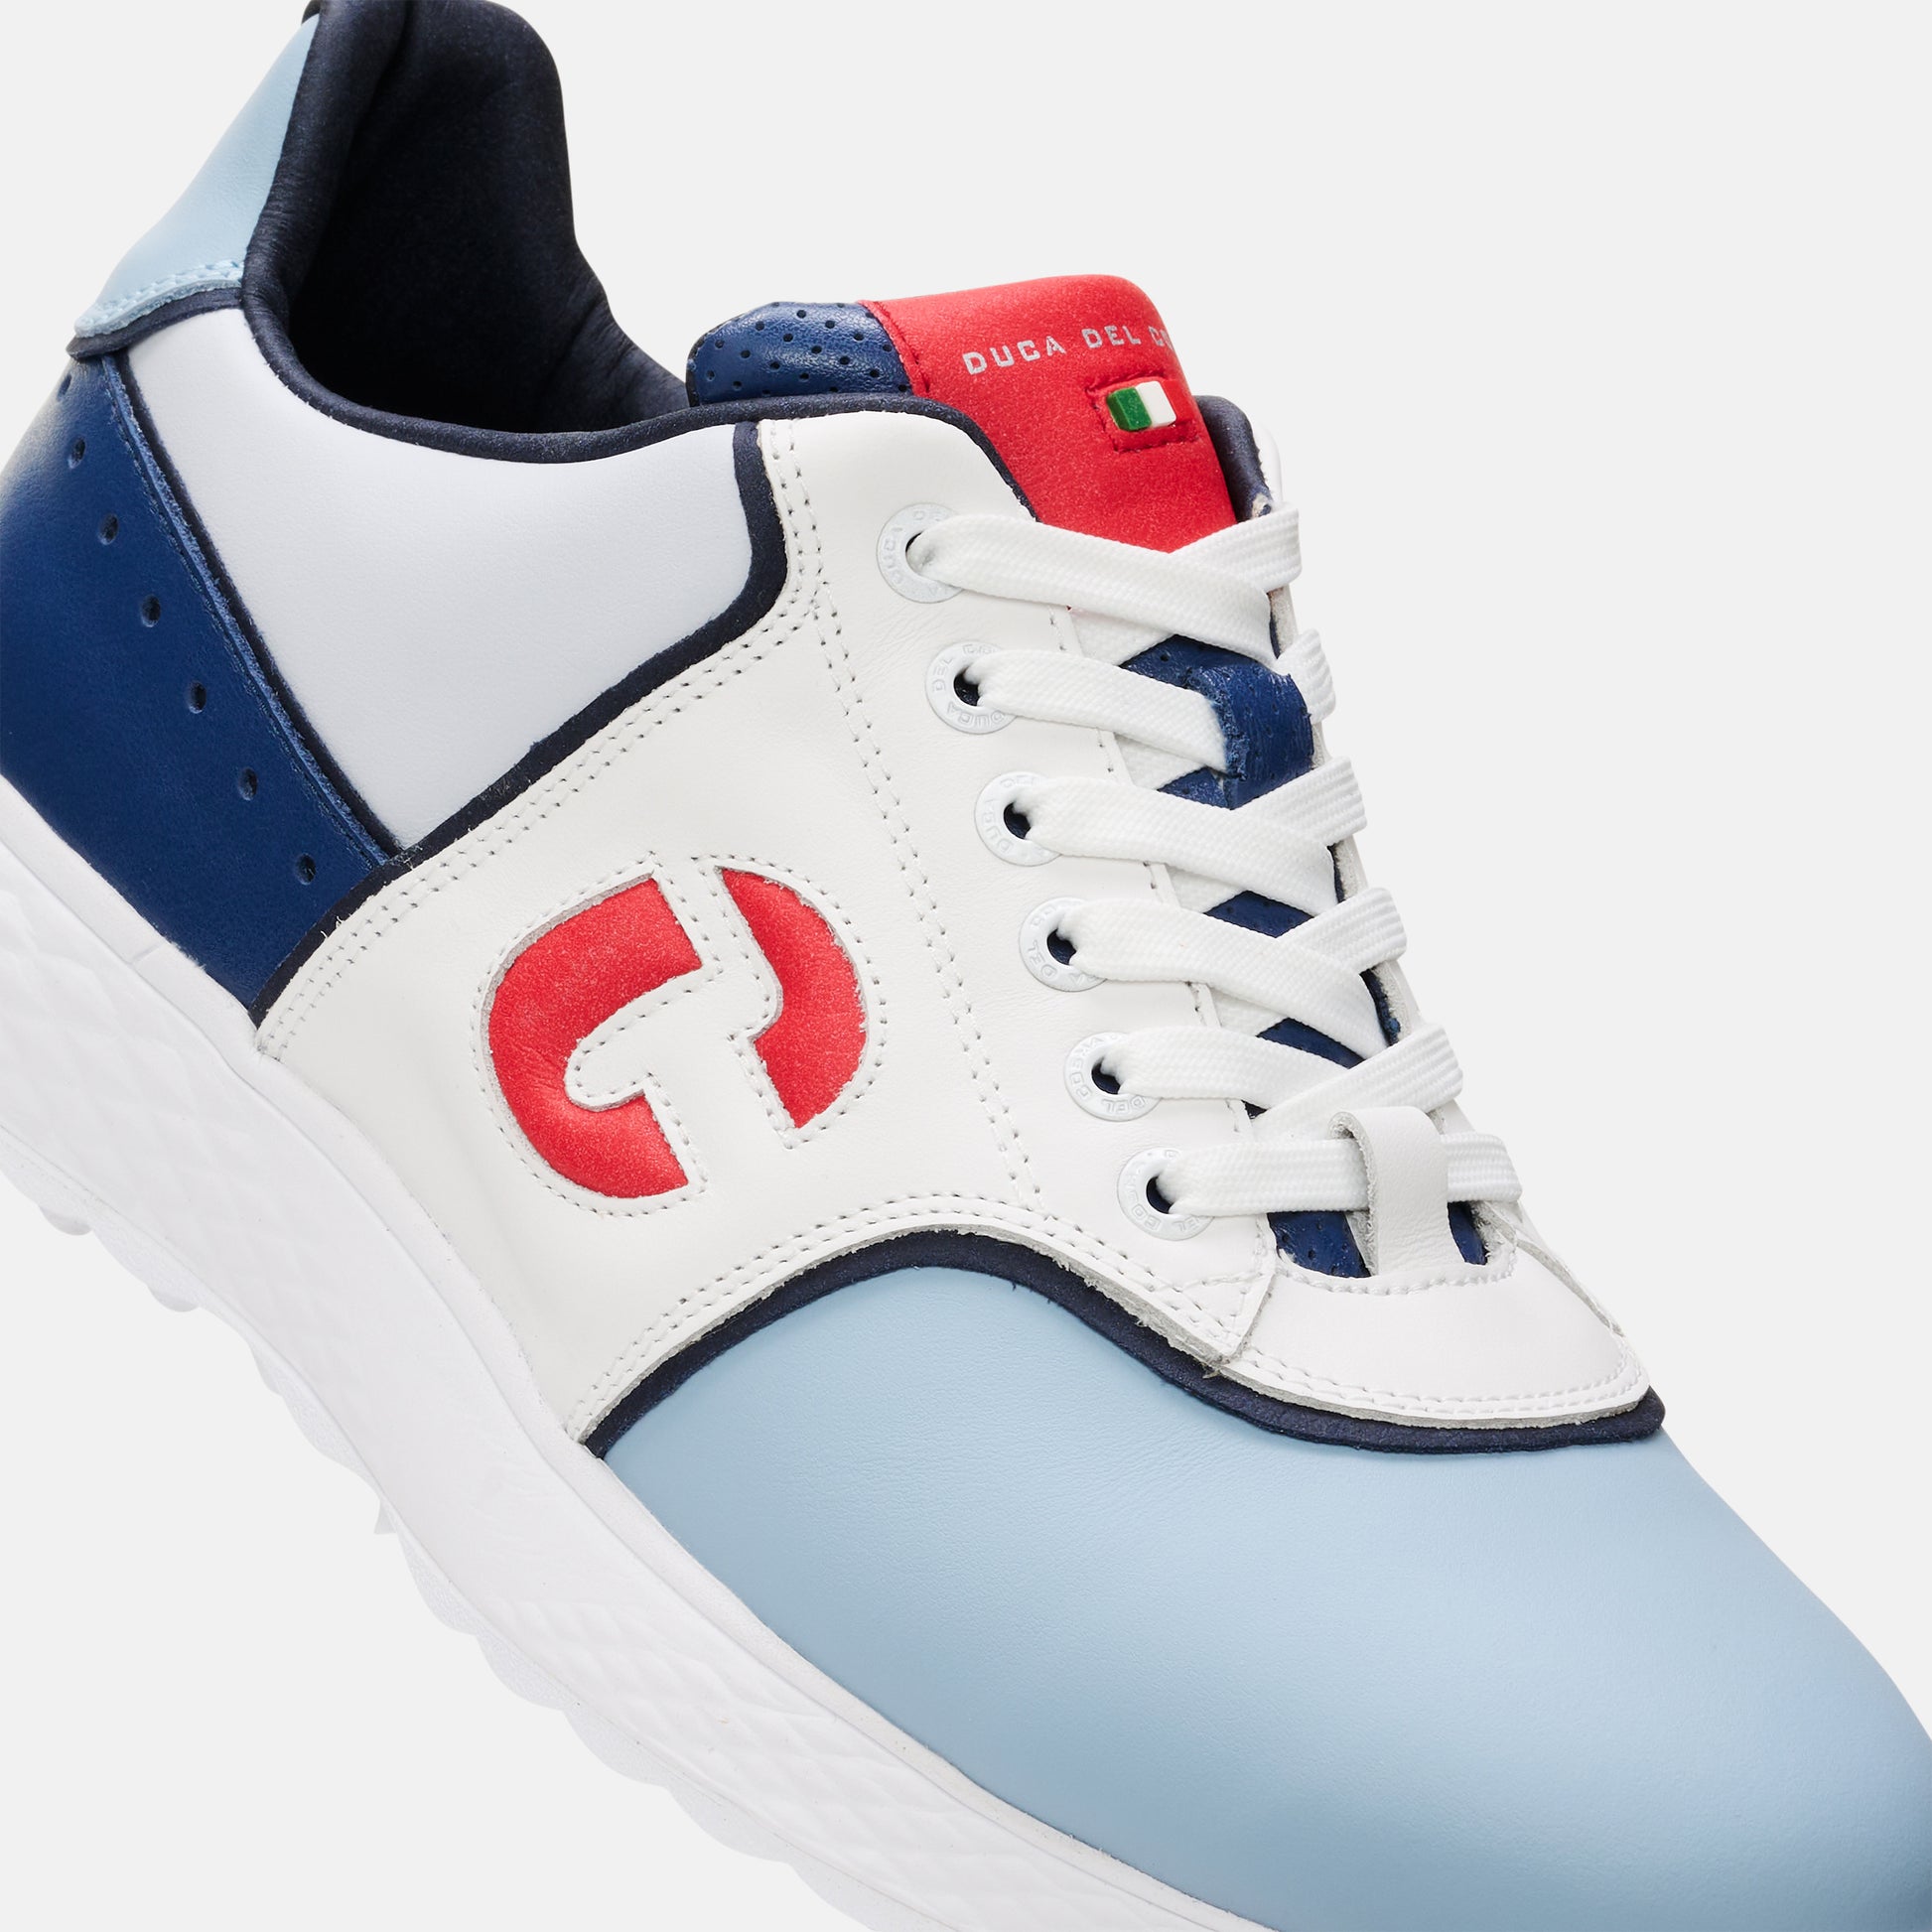 Red Golf Shoes, Blue Golf Shoes, Spikeless Golf Shoes, Waterproof Golf Shoes, Lightweight Golf Shoes, Duca del Cosma Men's Golf Shoes, Sneaker golf shoes.